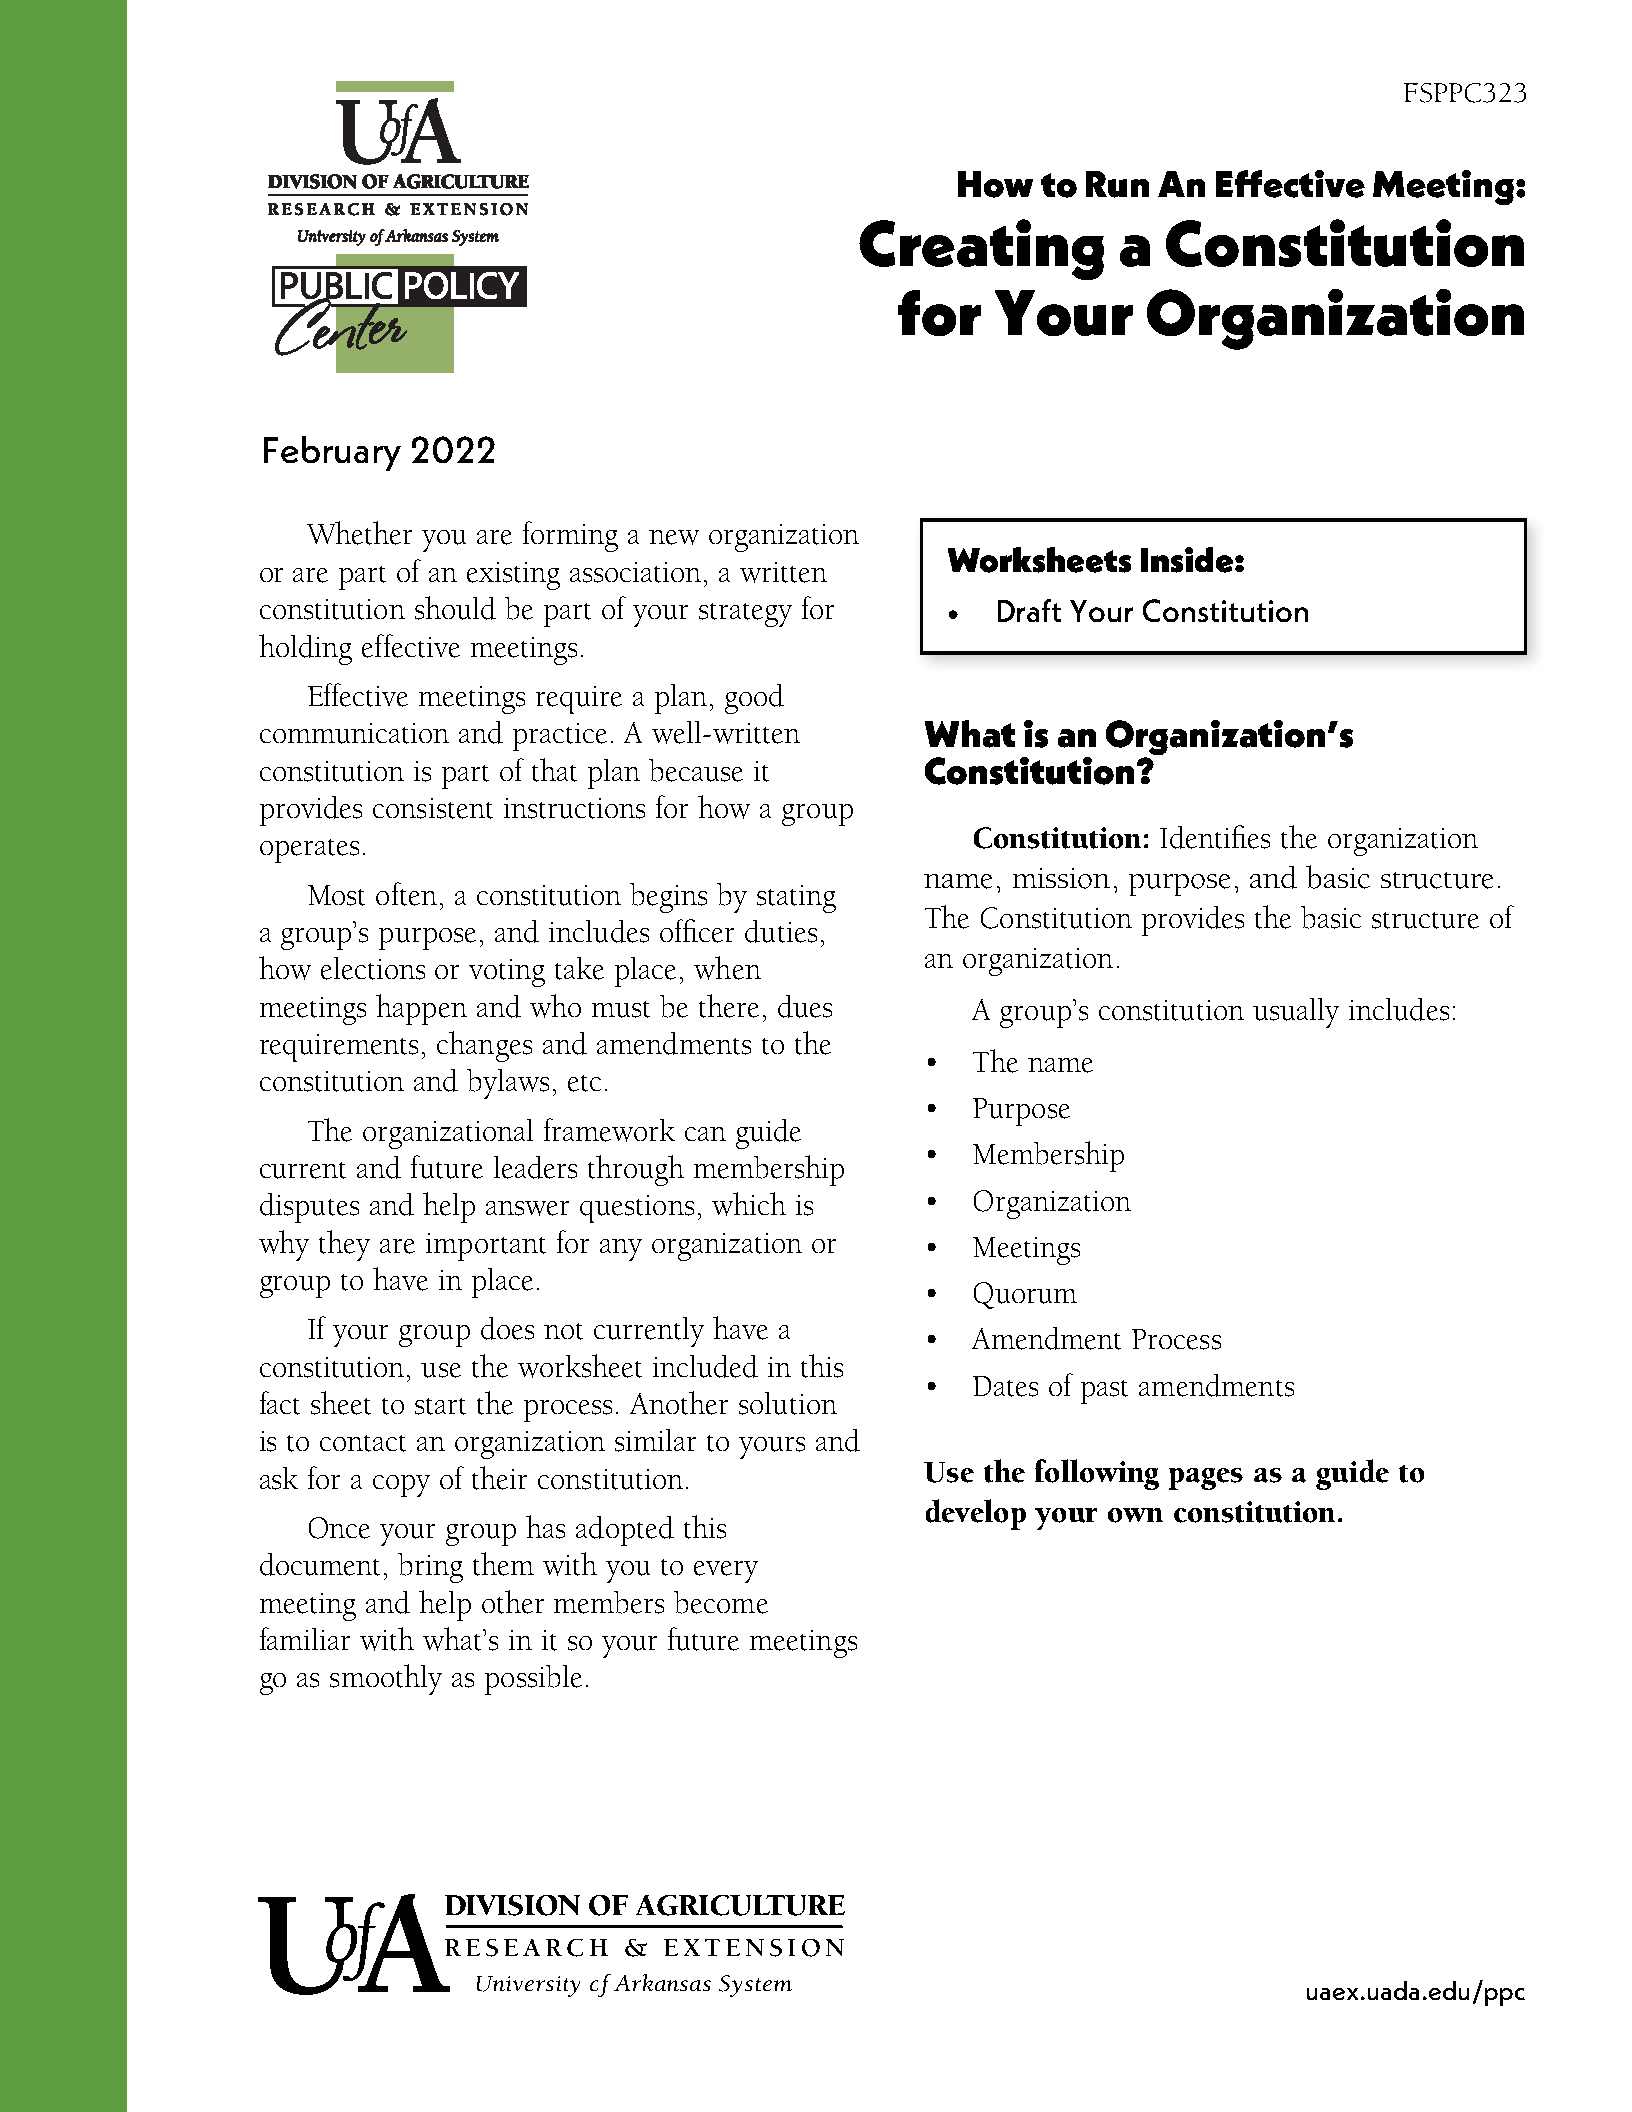 Front page of Creating a Constitution for Your Organization Fact Sheet